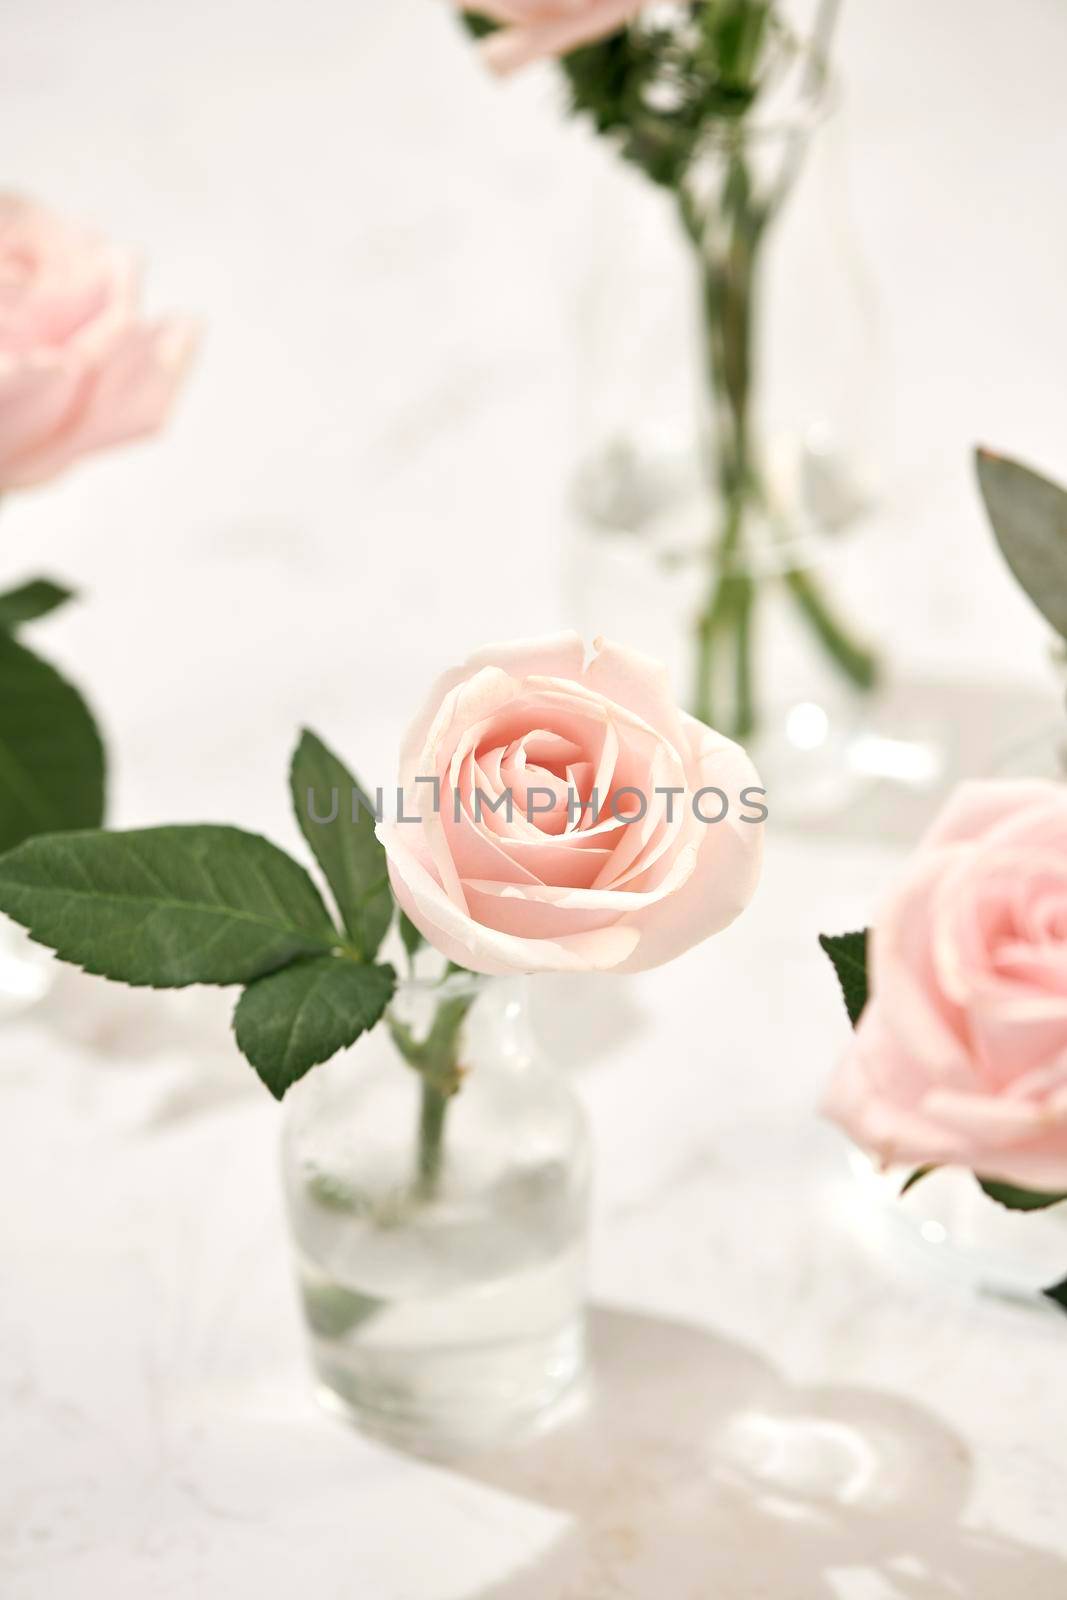 Beautiful rose flowers in vase on pink background. Greeting card for Womens day or Mothers day.